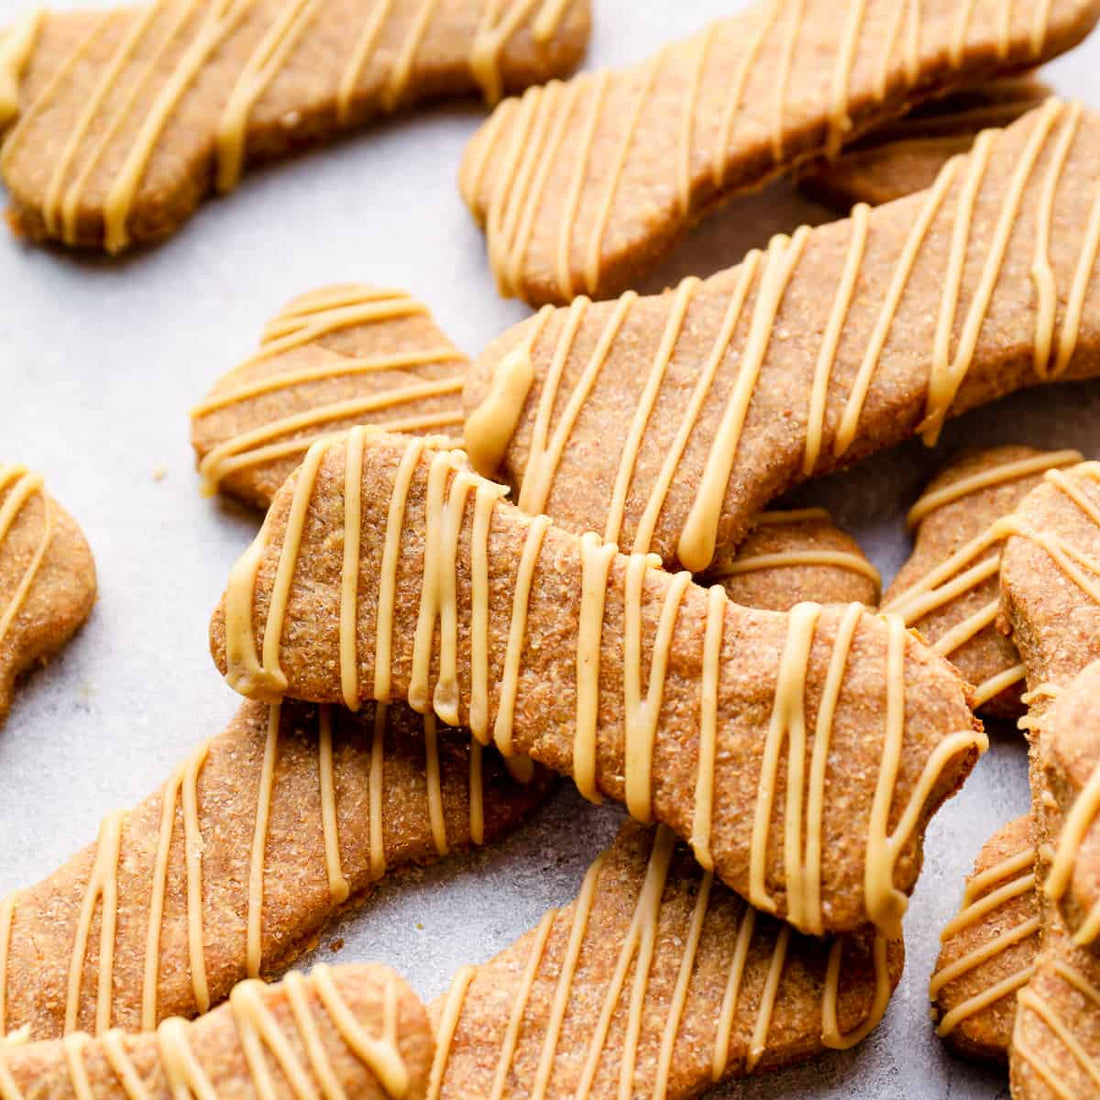 5 Benefits of Homemade Dog Treats for Your Furry Friend